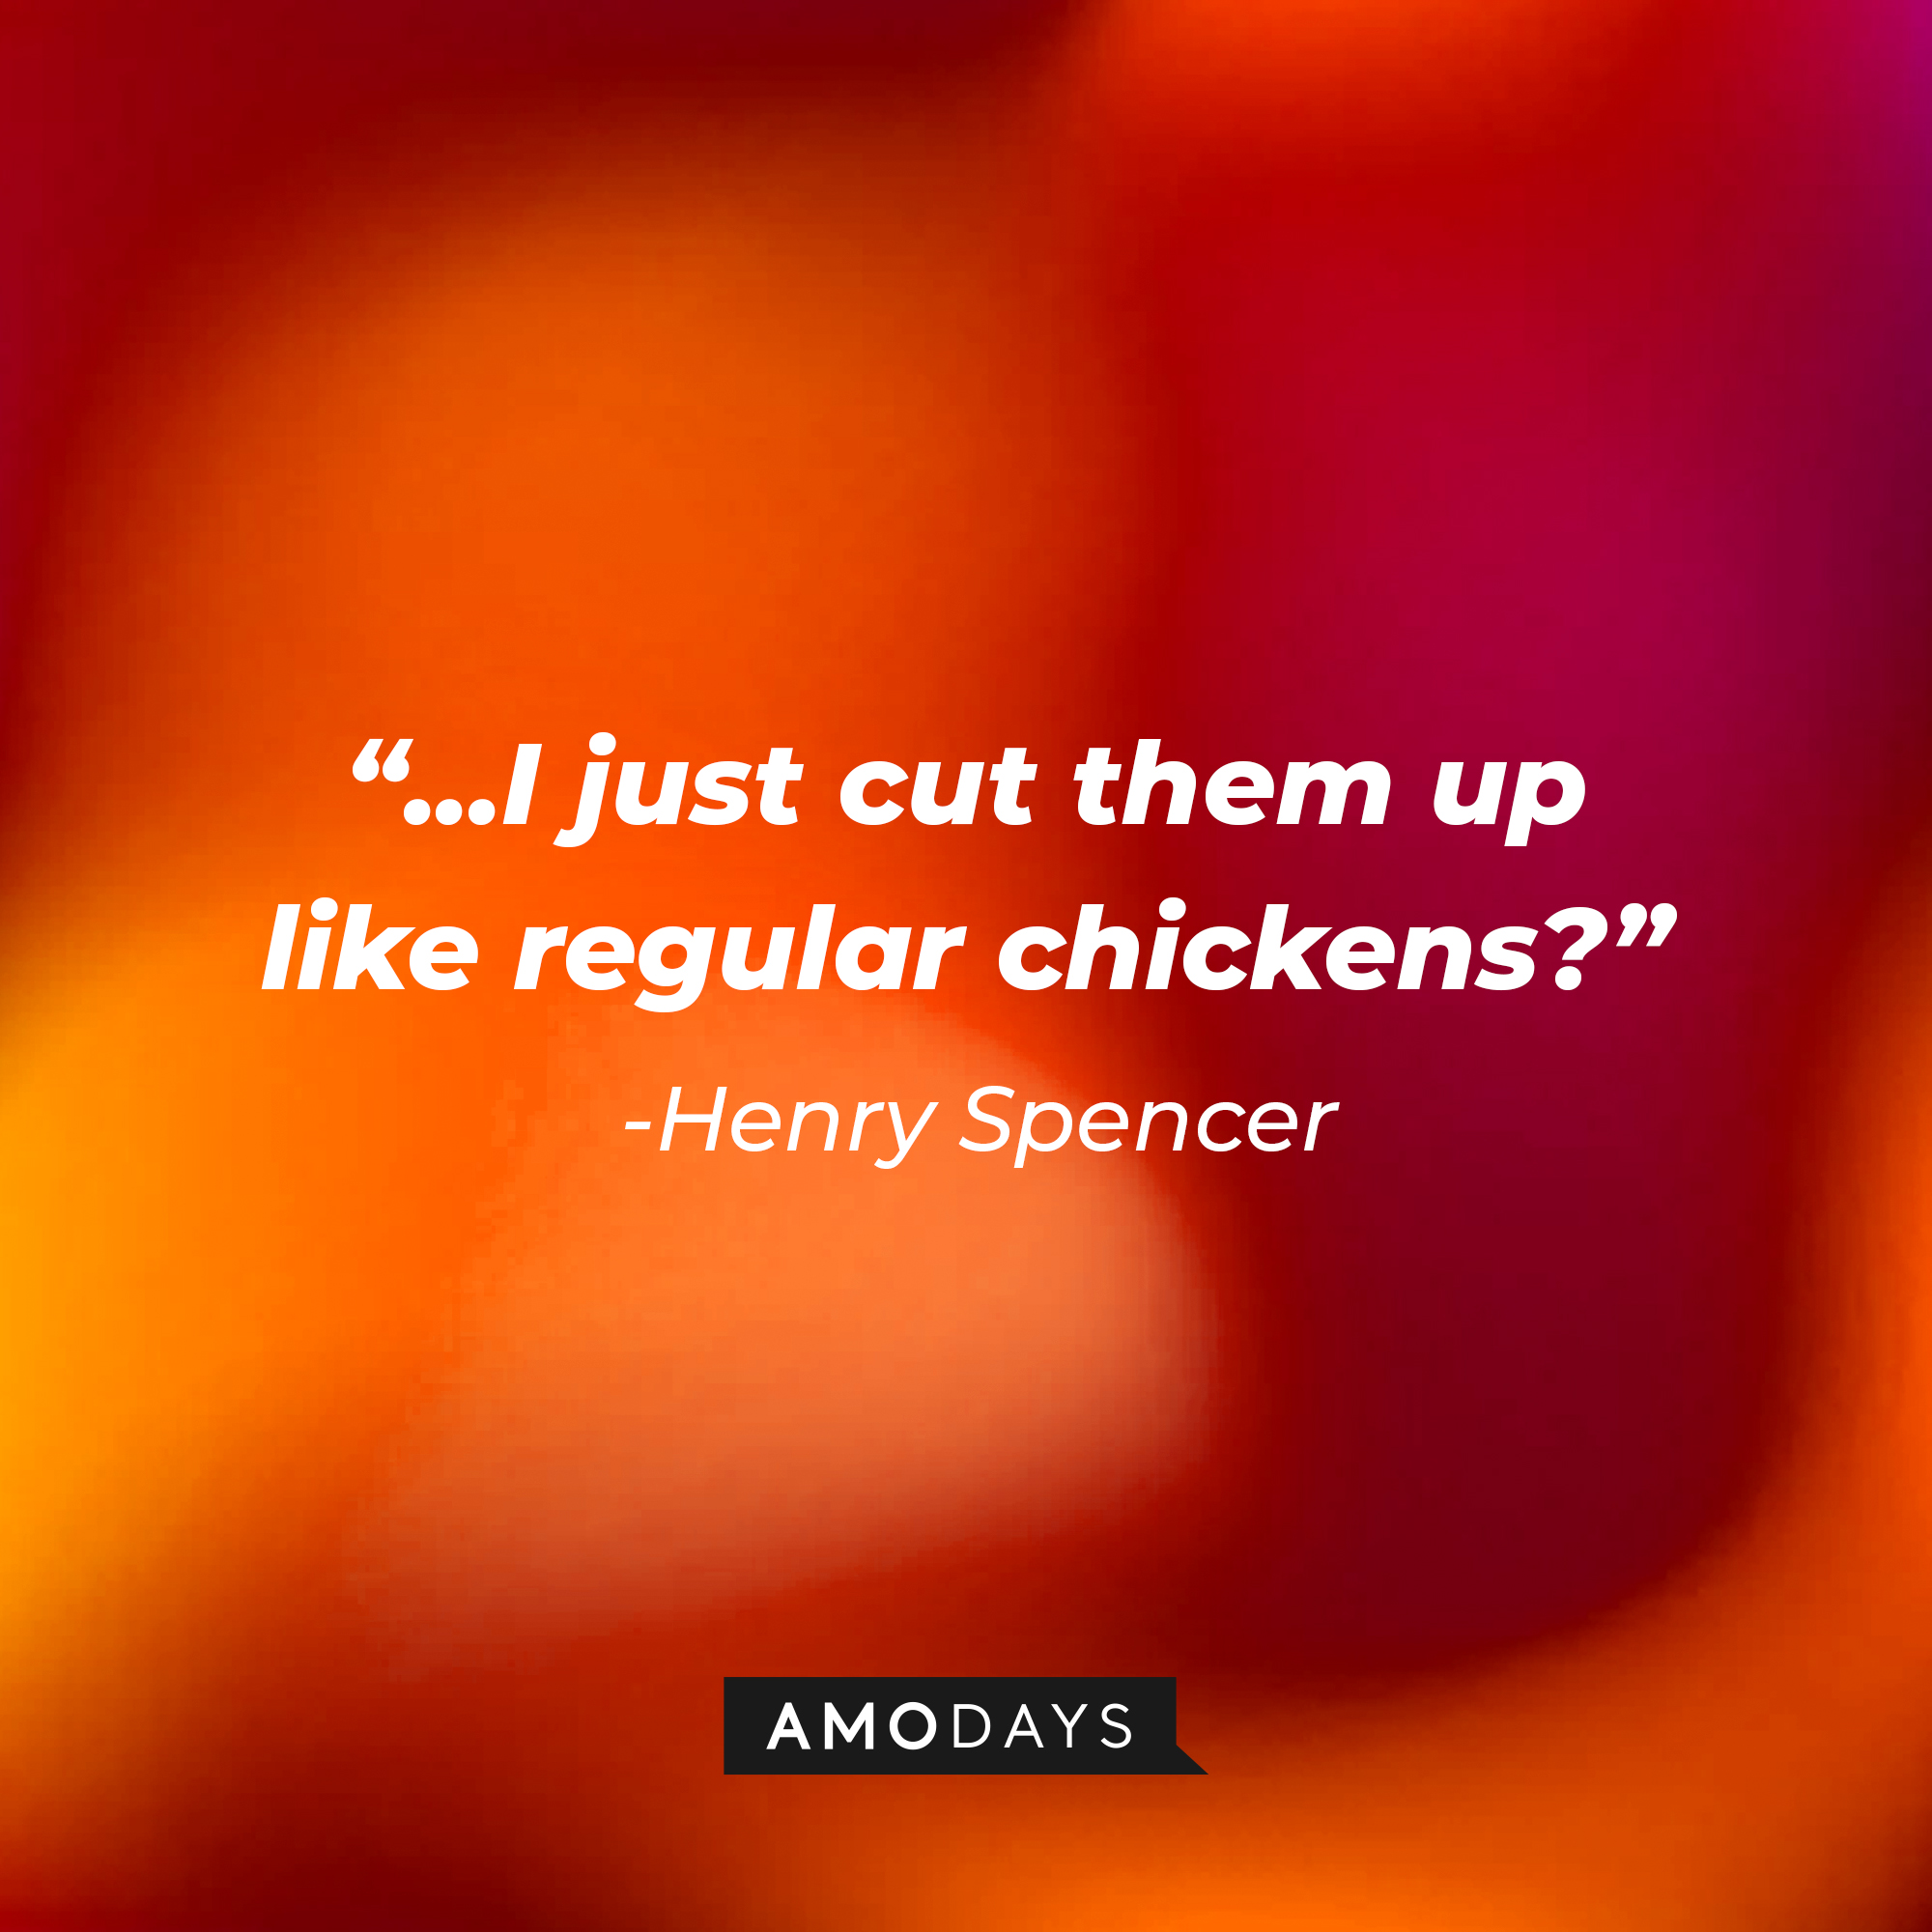 Henry Spencer’s quote:“...I just cut them up like regular chickens?”  |  Source: AmoDays